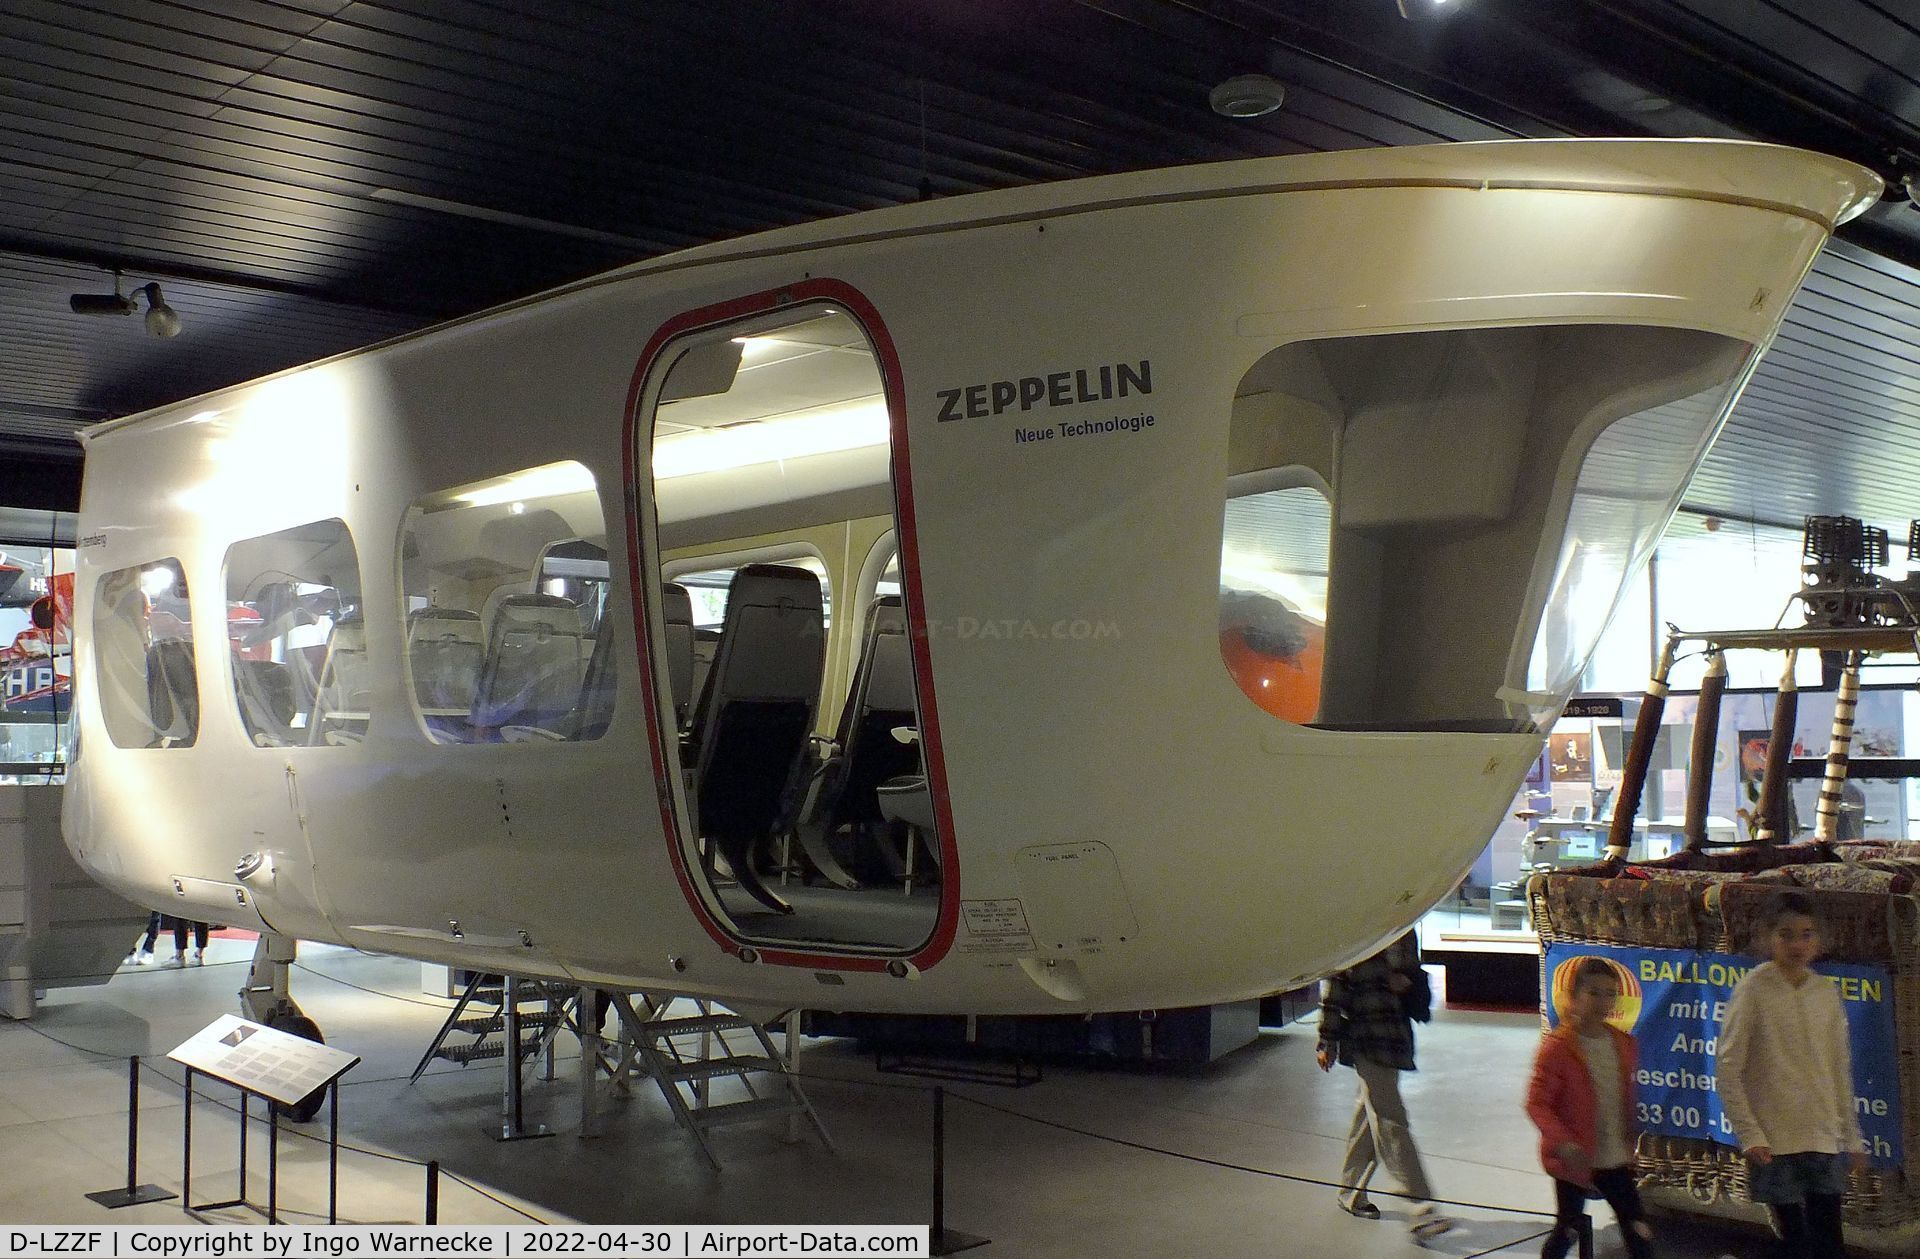 D-LZZF, 1998 Zeppelin NT07 C/N 3, Gondola of Zeppelin NT07, used from 2003 to 2014 and replaced after more than 12000 flight hours, at the Verkehrshaus der Schweiz, Luzern (Lucerne)